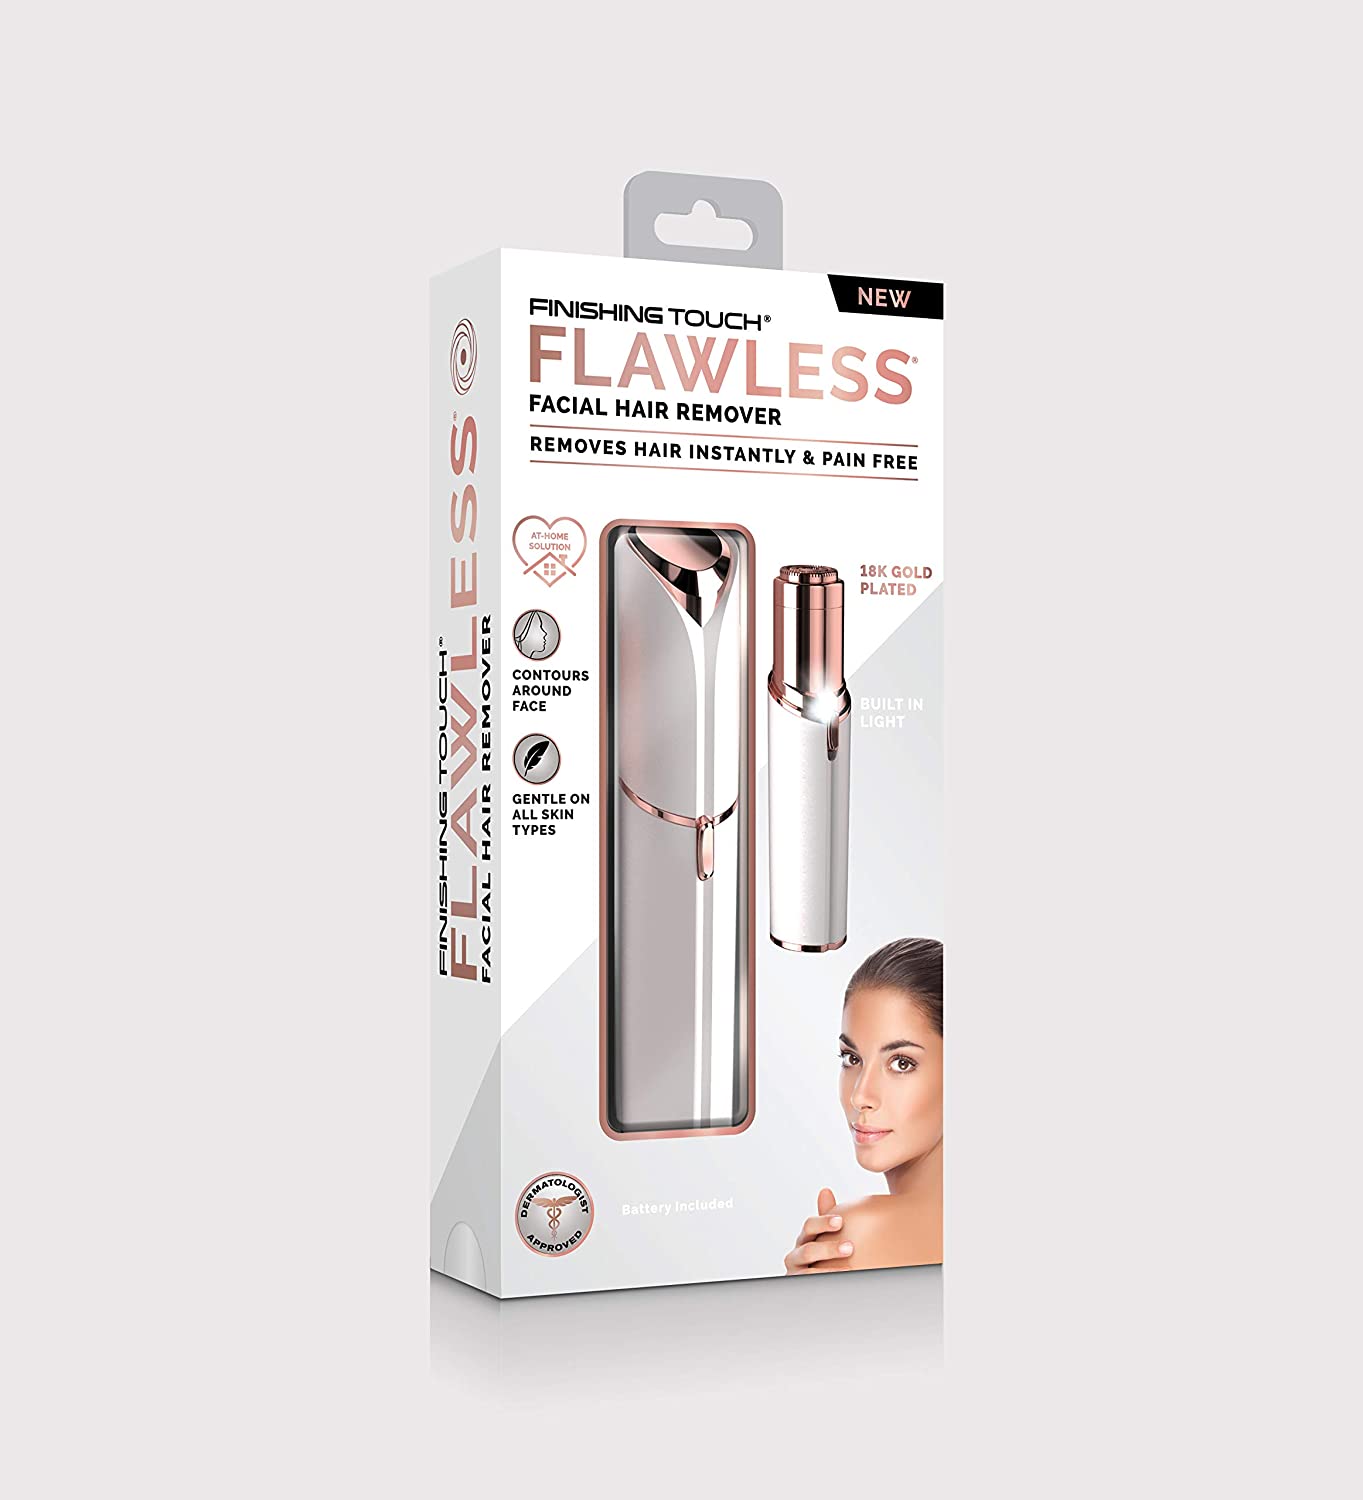 Finishing Touch Flawless 18K Gold Plated Face Razor